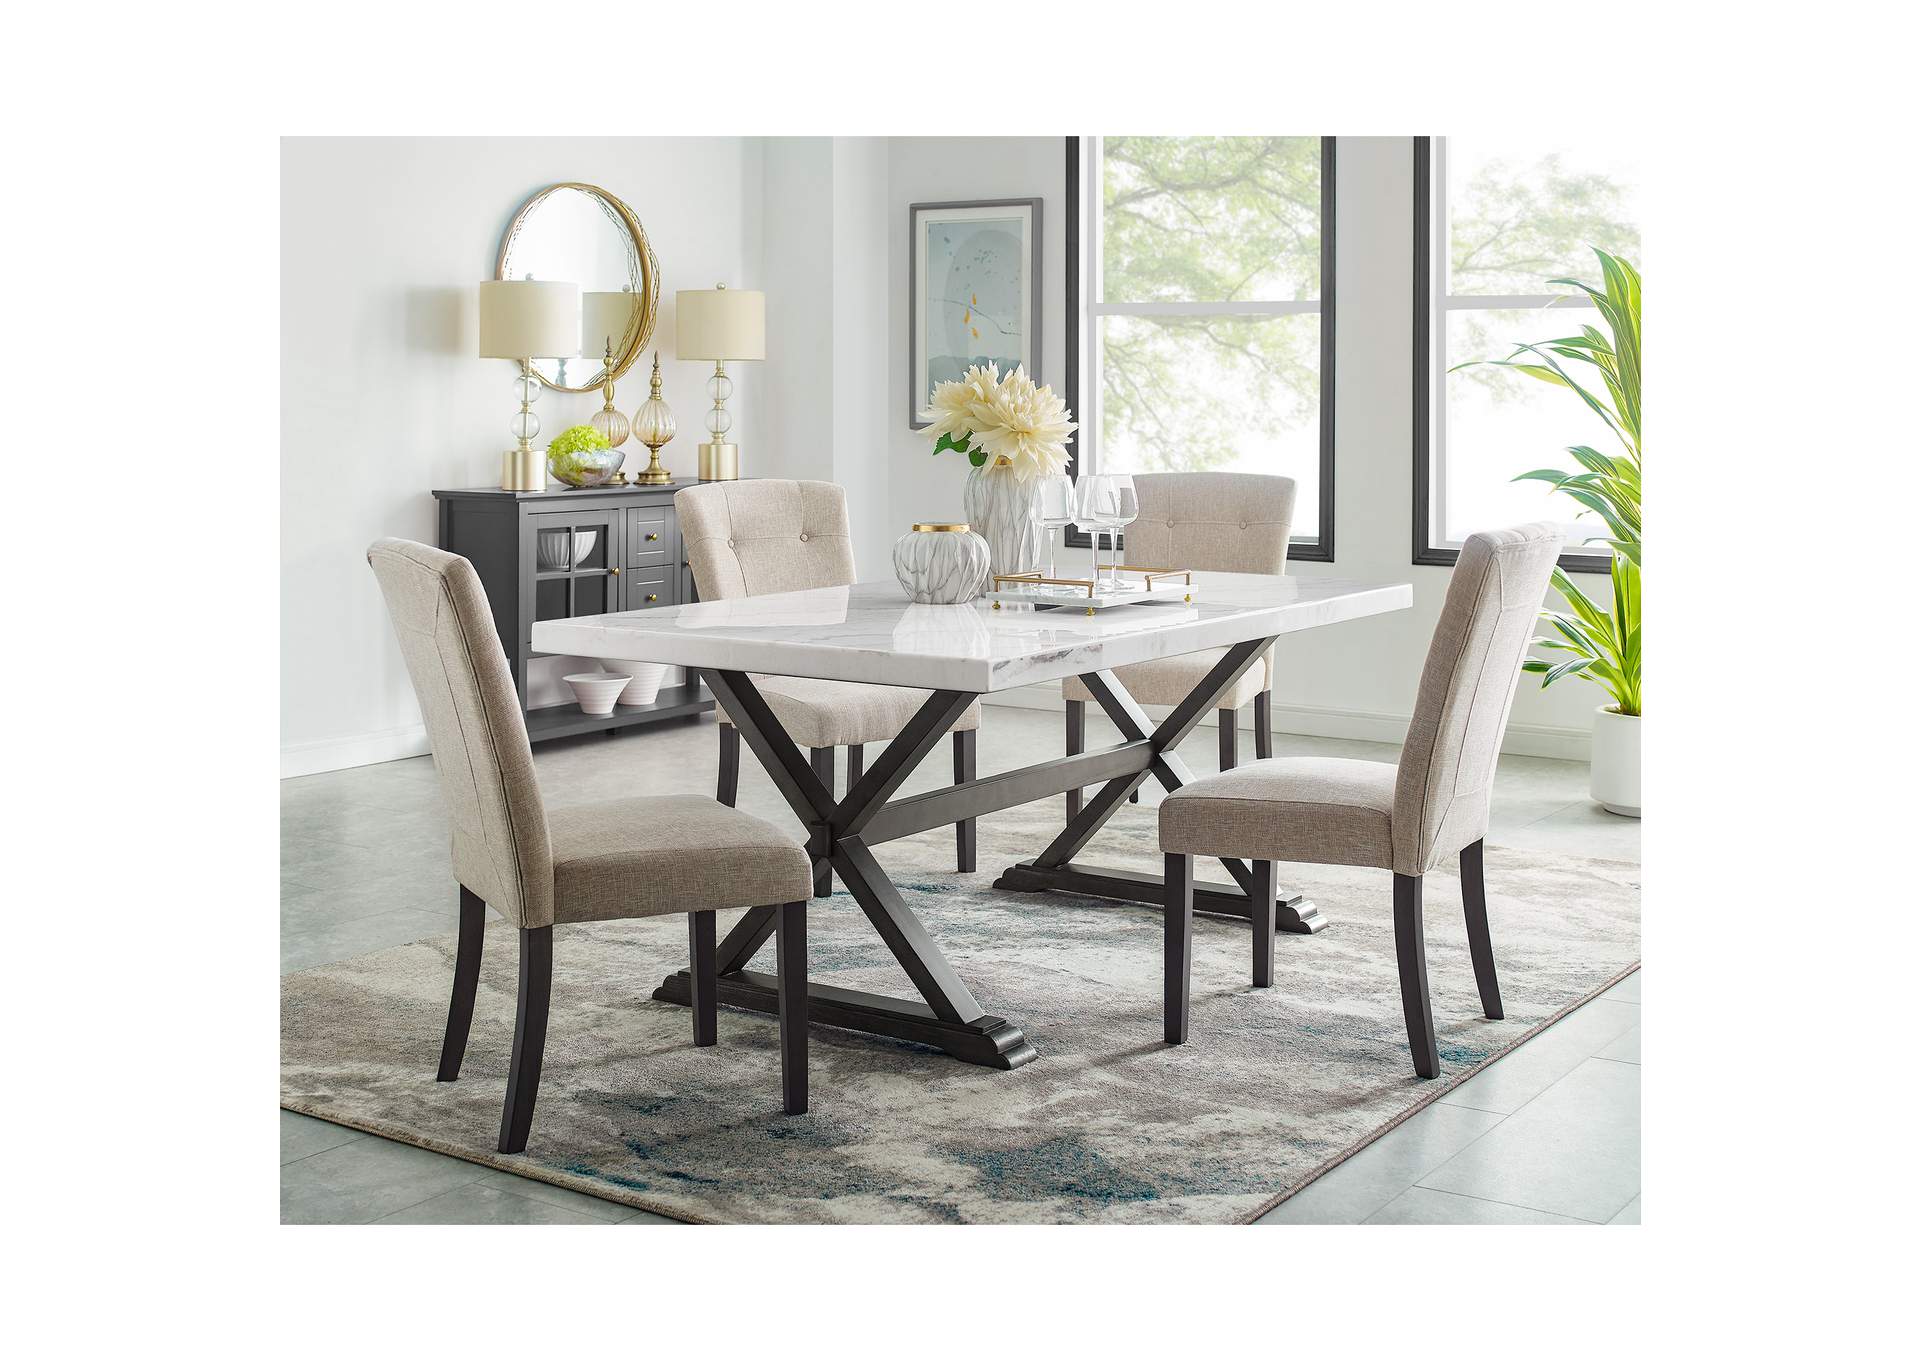 Lexi Dining Table,Elements